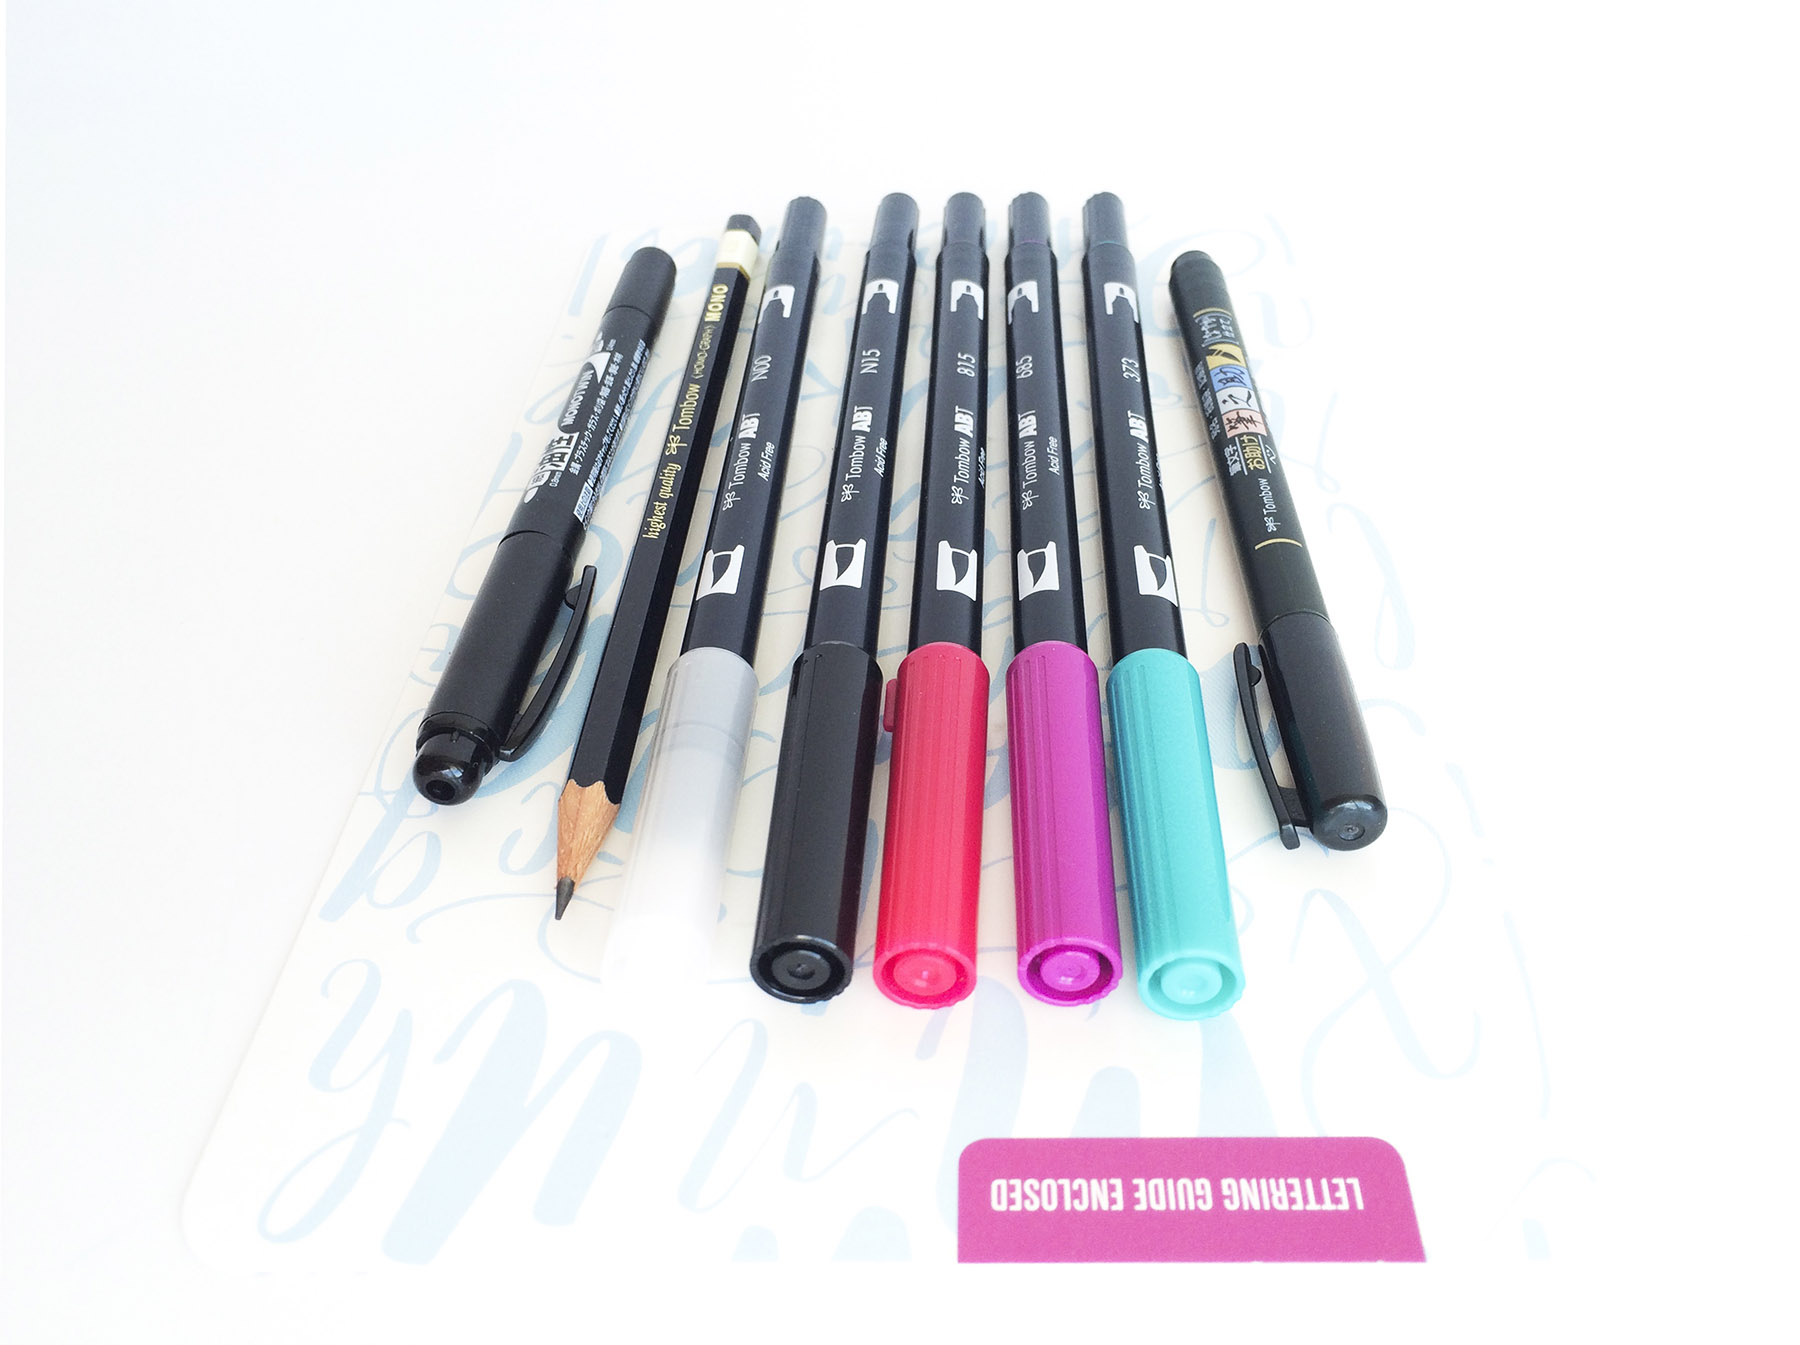 5 Steps to Working with Clients | by Amanda Arneill for Tombow | Introducing Tombow's new Lettering Sets!